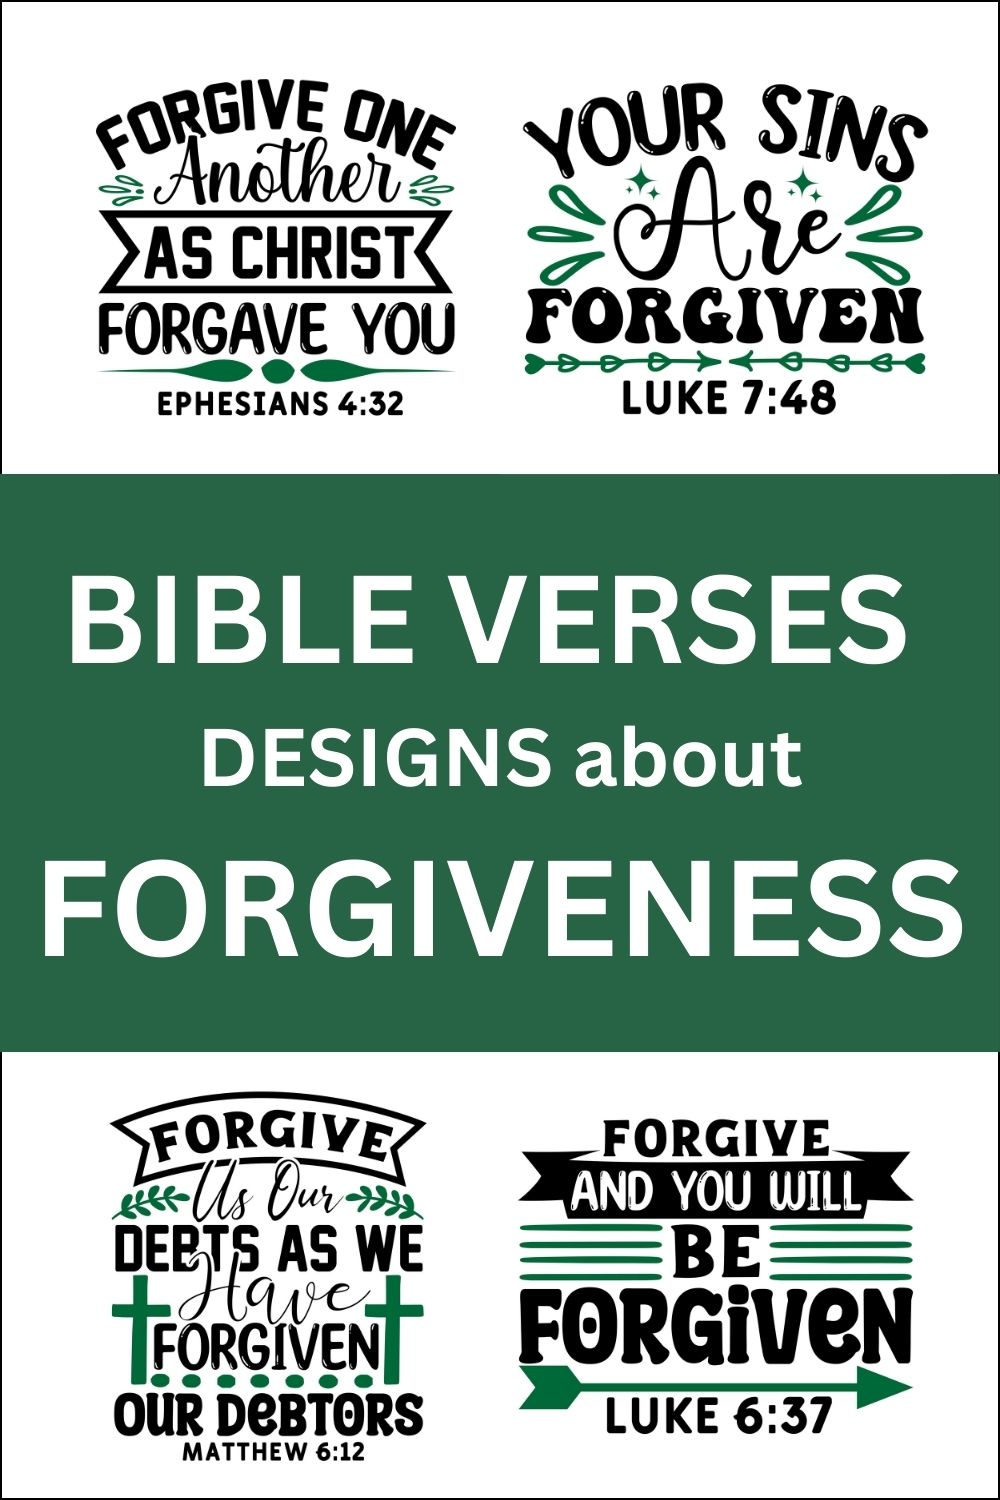 Free printable bundle of Bible Verses about forgiveness, scripture passages, Cricut designs, DIY patterns, svg files, templates, clip art, stencils, silhouette, embroidery, cut files, design space, vector, crafts, laser cutting, and DIY crafts.